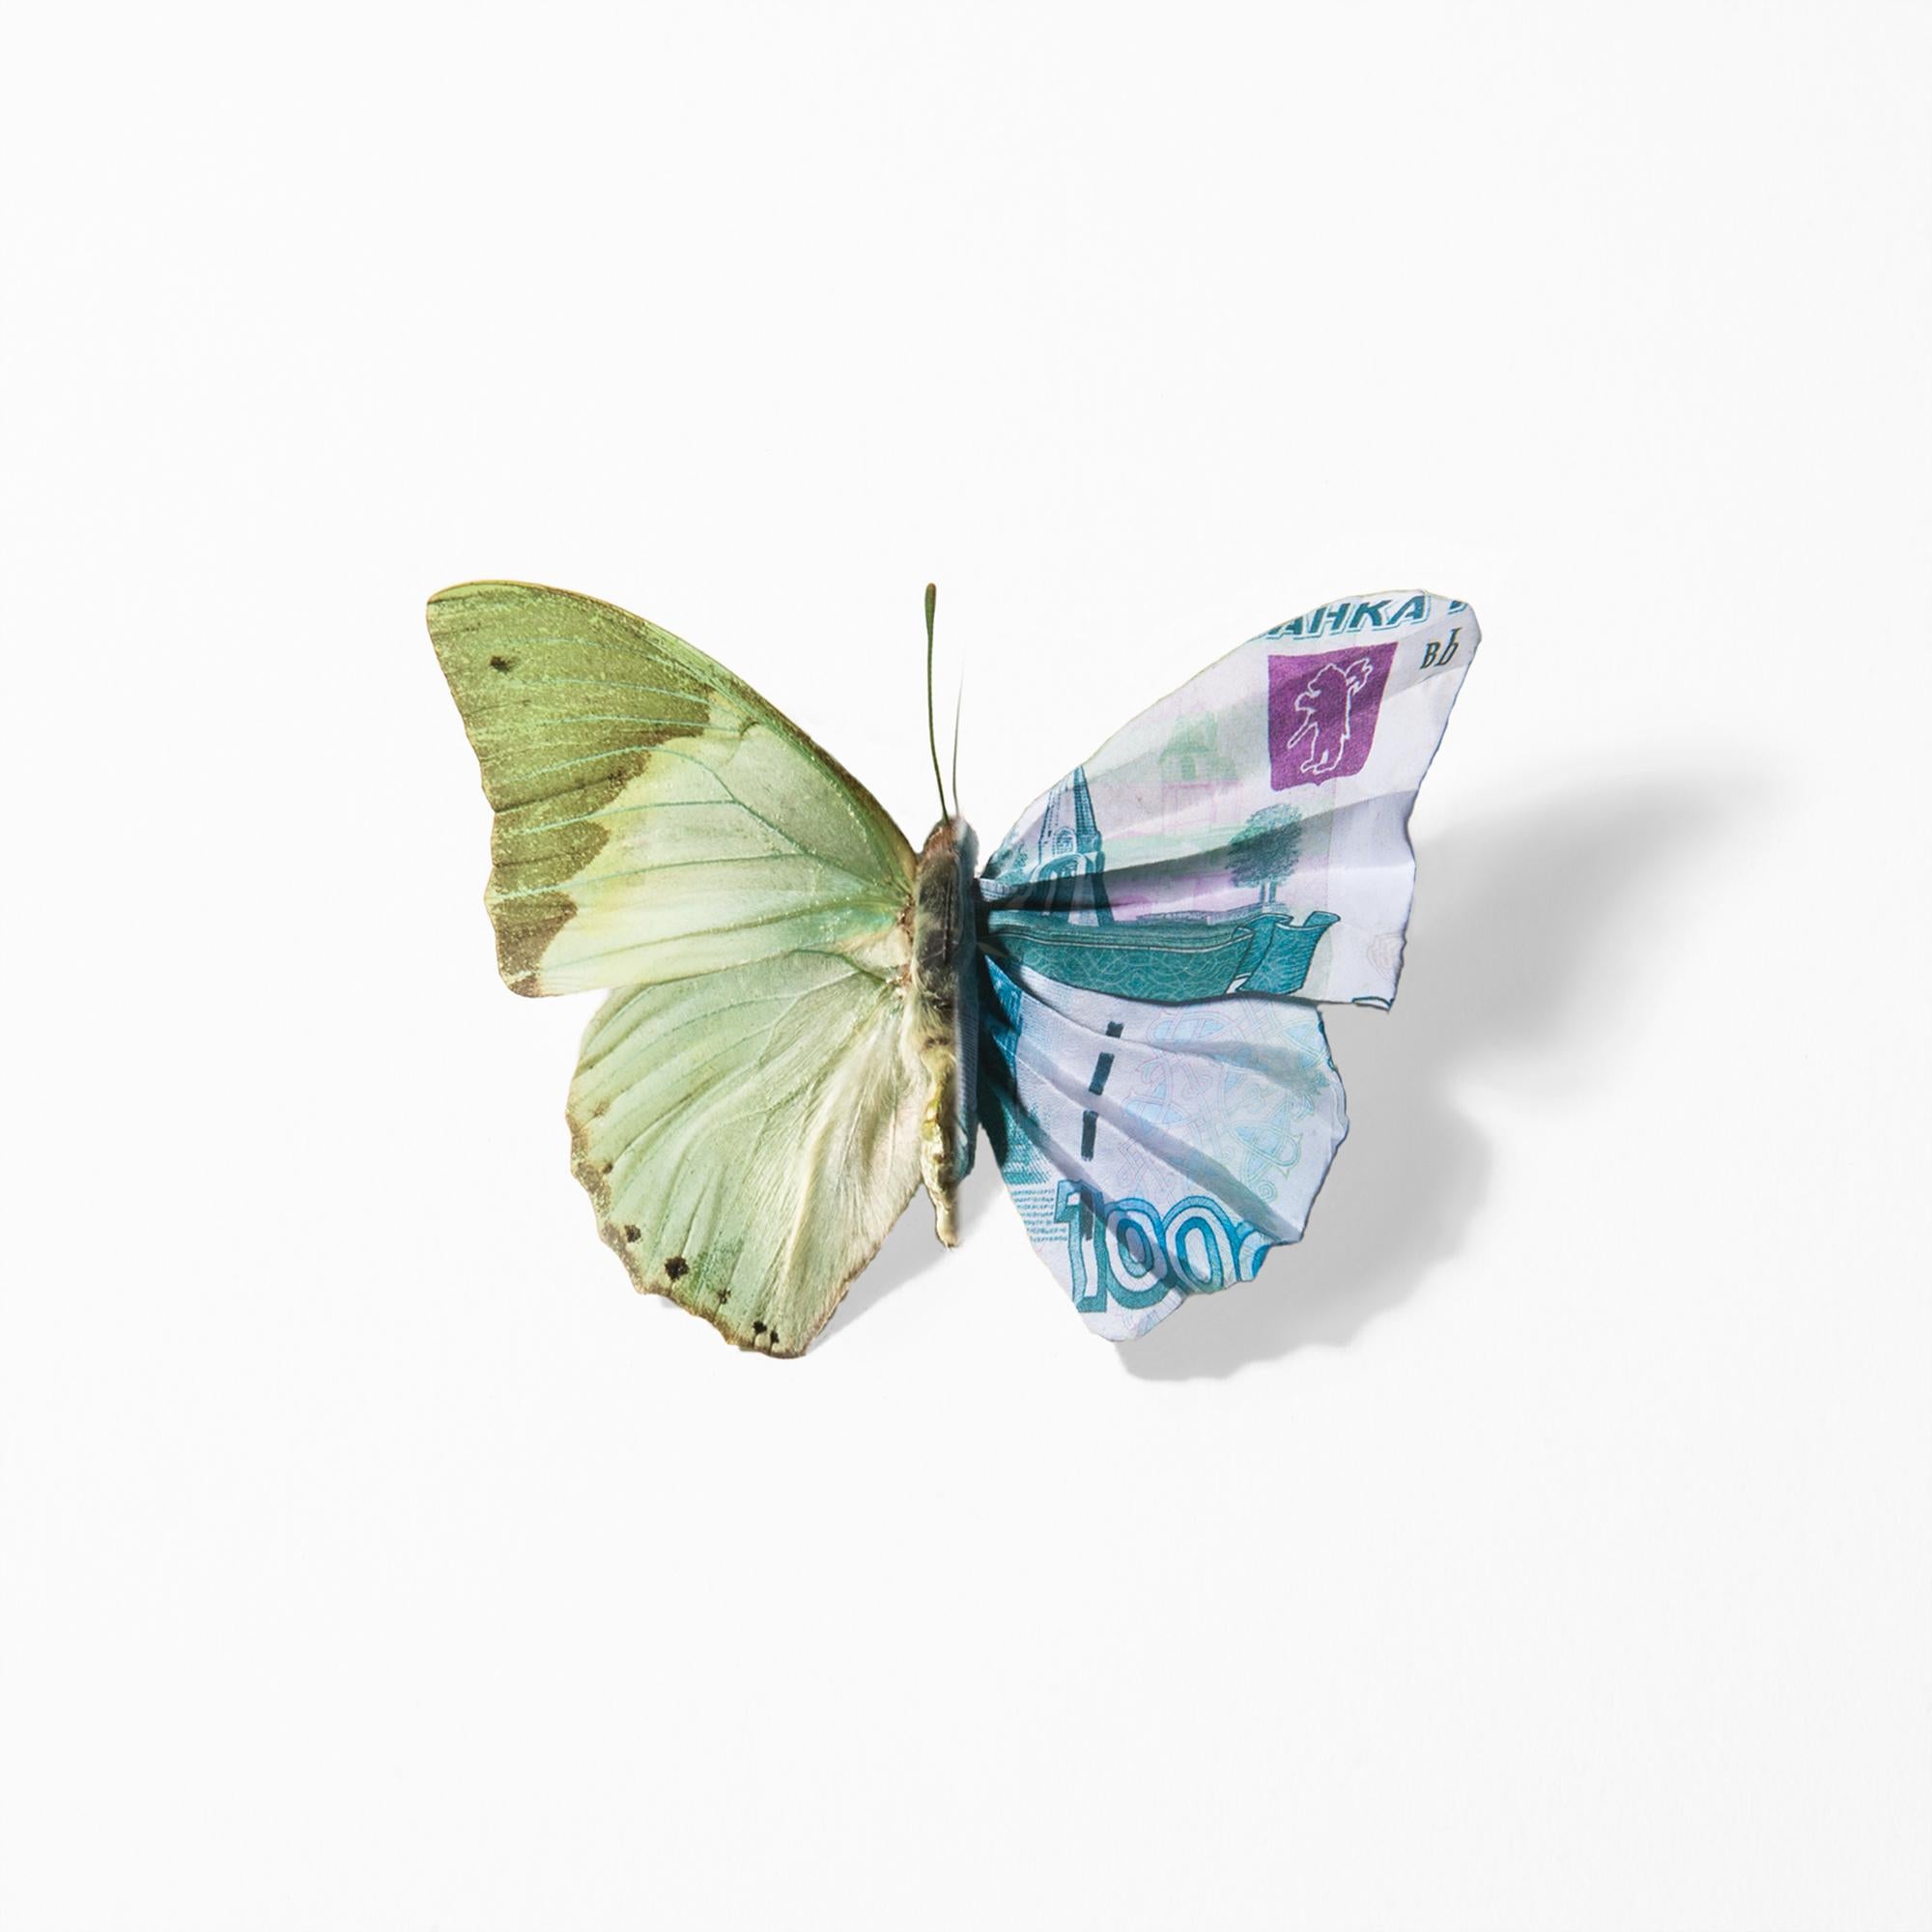 Anna Tas Still-Life Photograph - "A Thing of Beauty #7 (Charaxes) 20x20", Lenticular, Butterfly, Currency Motif